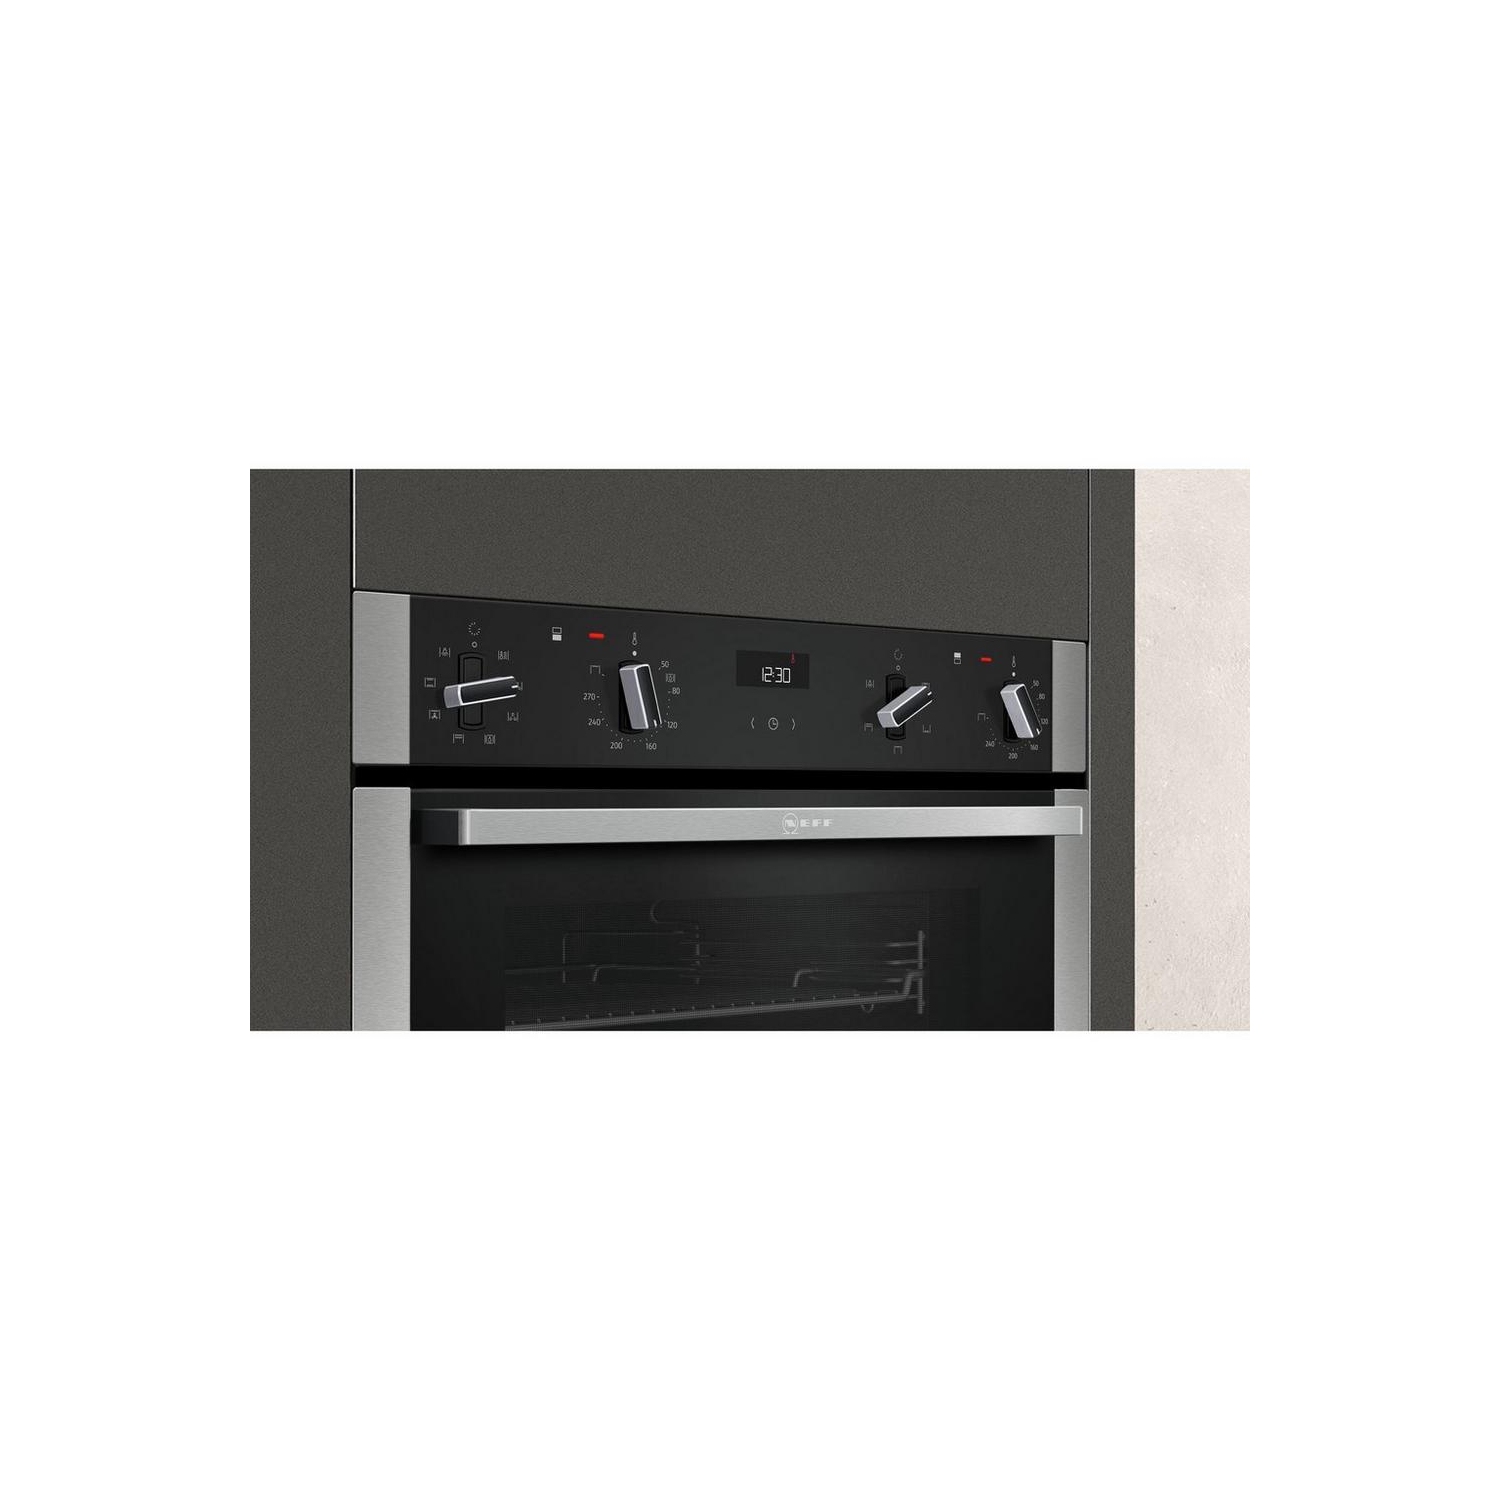 NEFF U1ACE2HN0B 59.4cm Built In Electric CircoTherm Double Oven - Black/Steel - 3